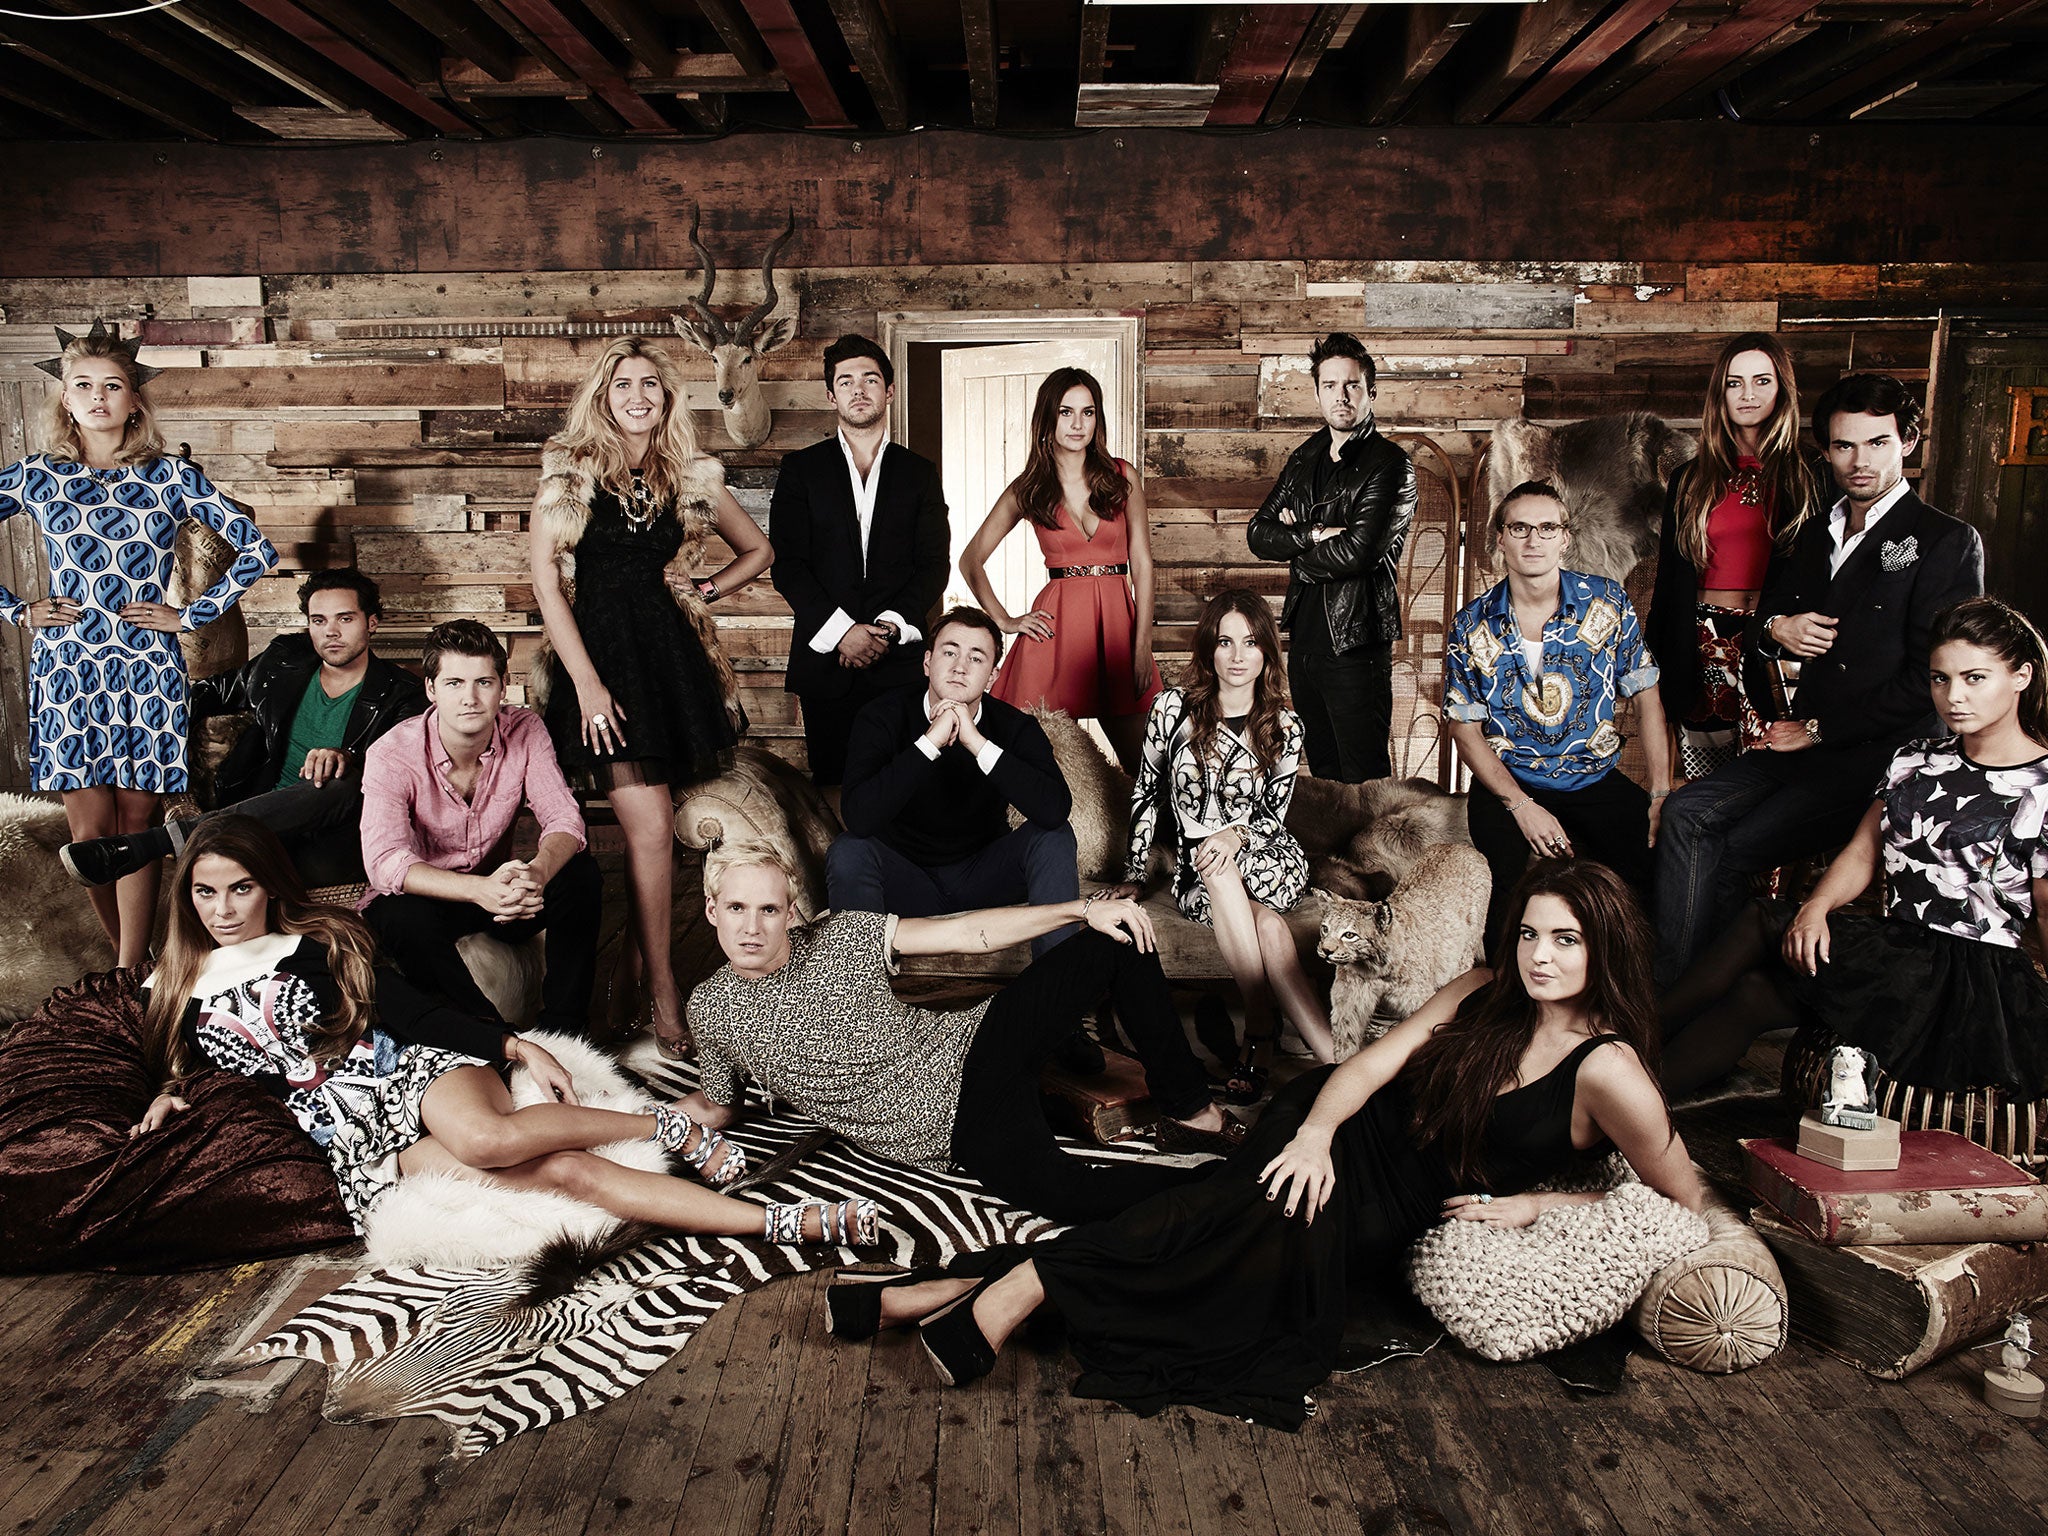 Look who's back, back again: the cast of Made in Chelsea